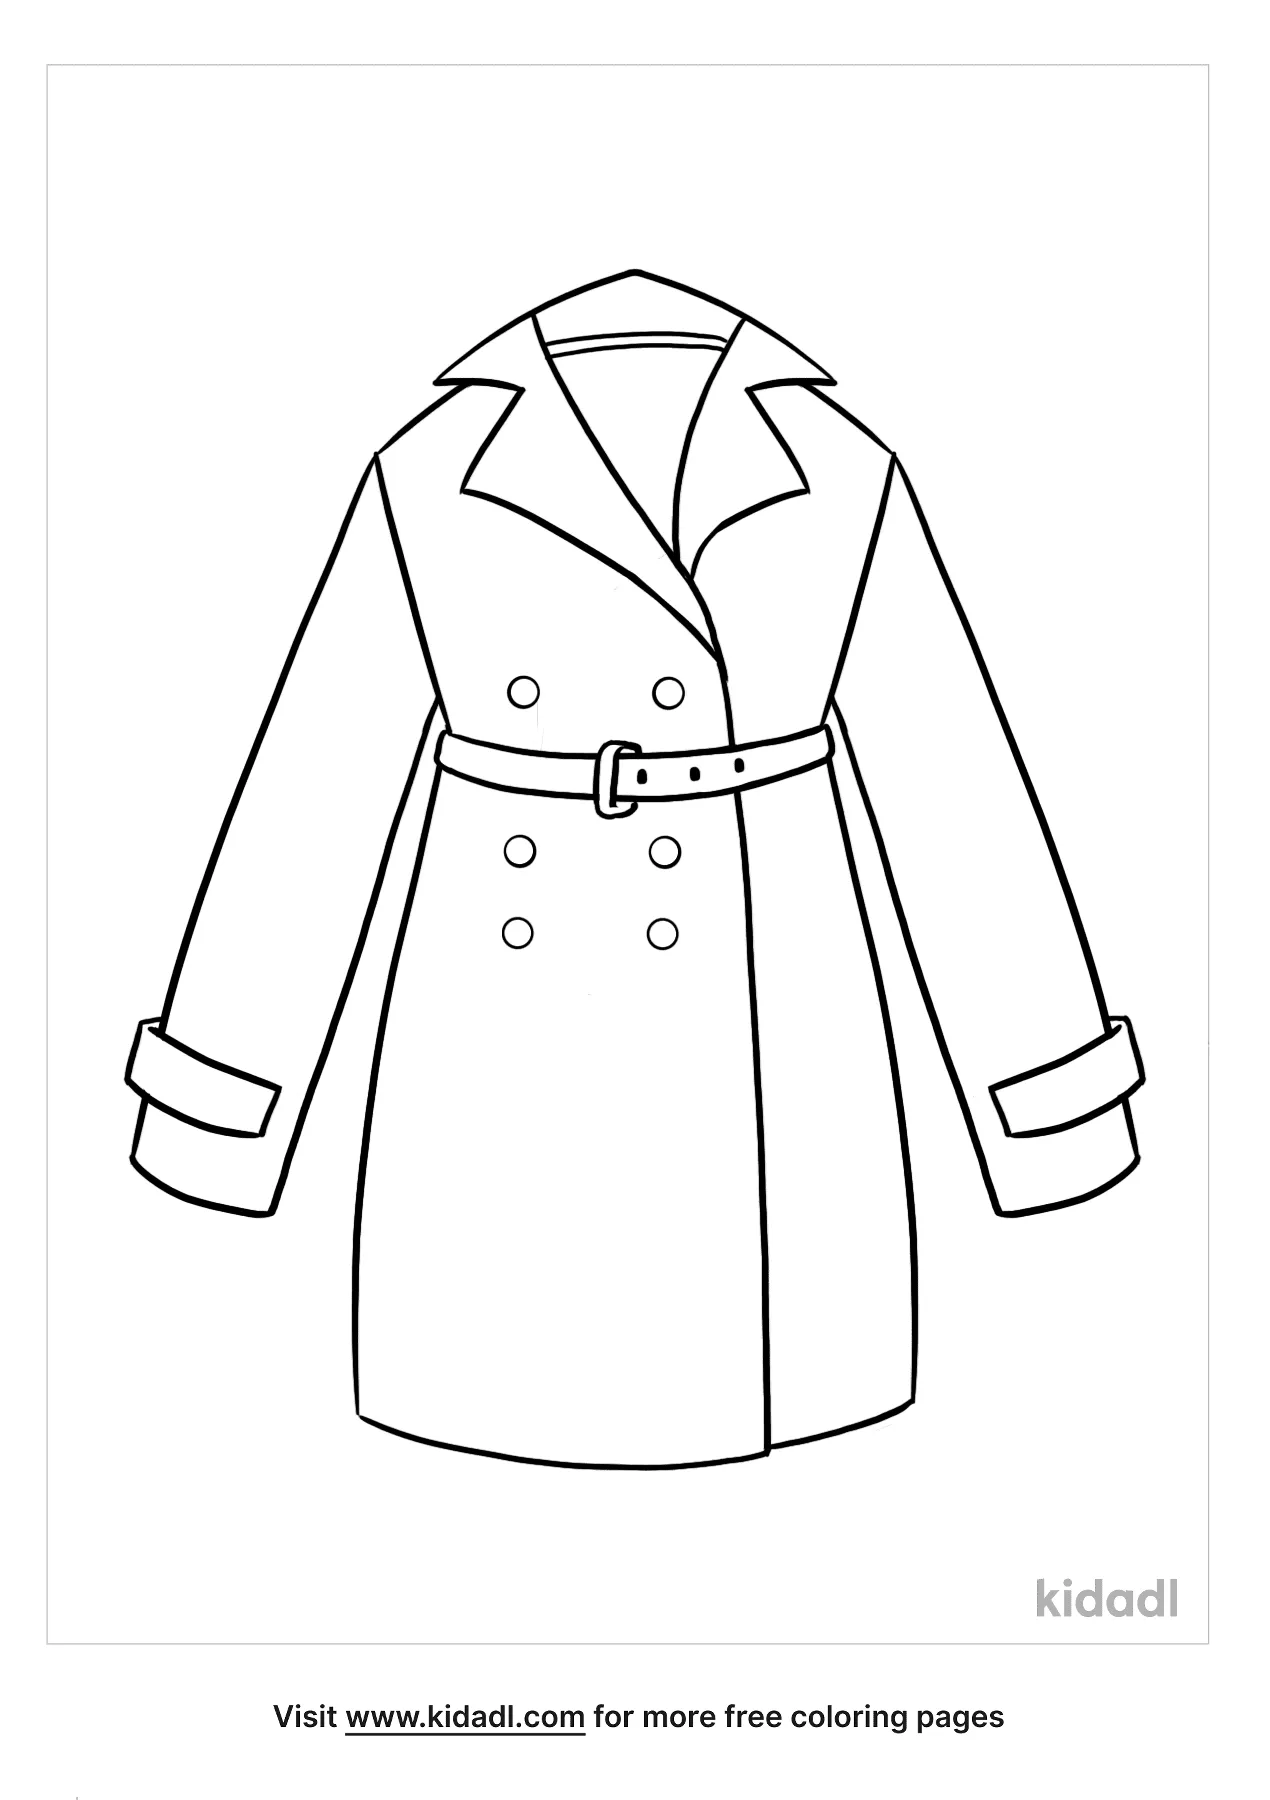 Coat Coloring Pages | Free Fashion-and-beauty Coloring Pages | Kidadl